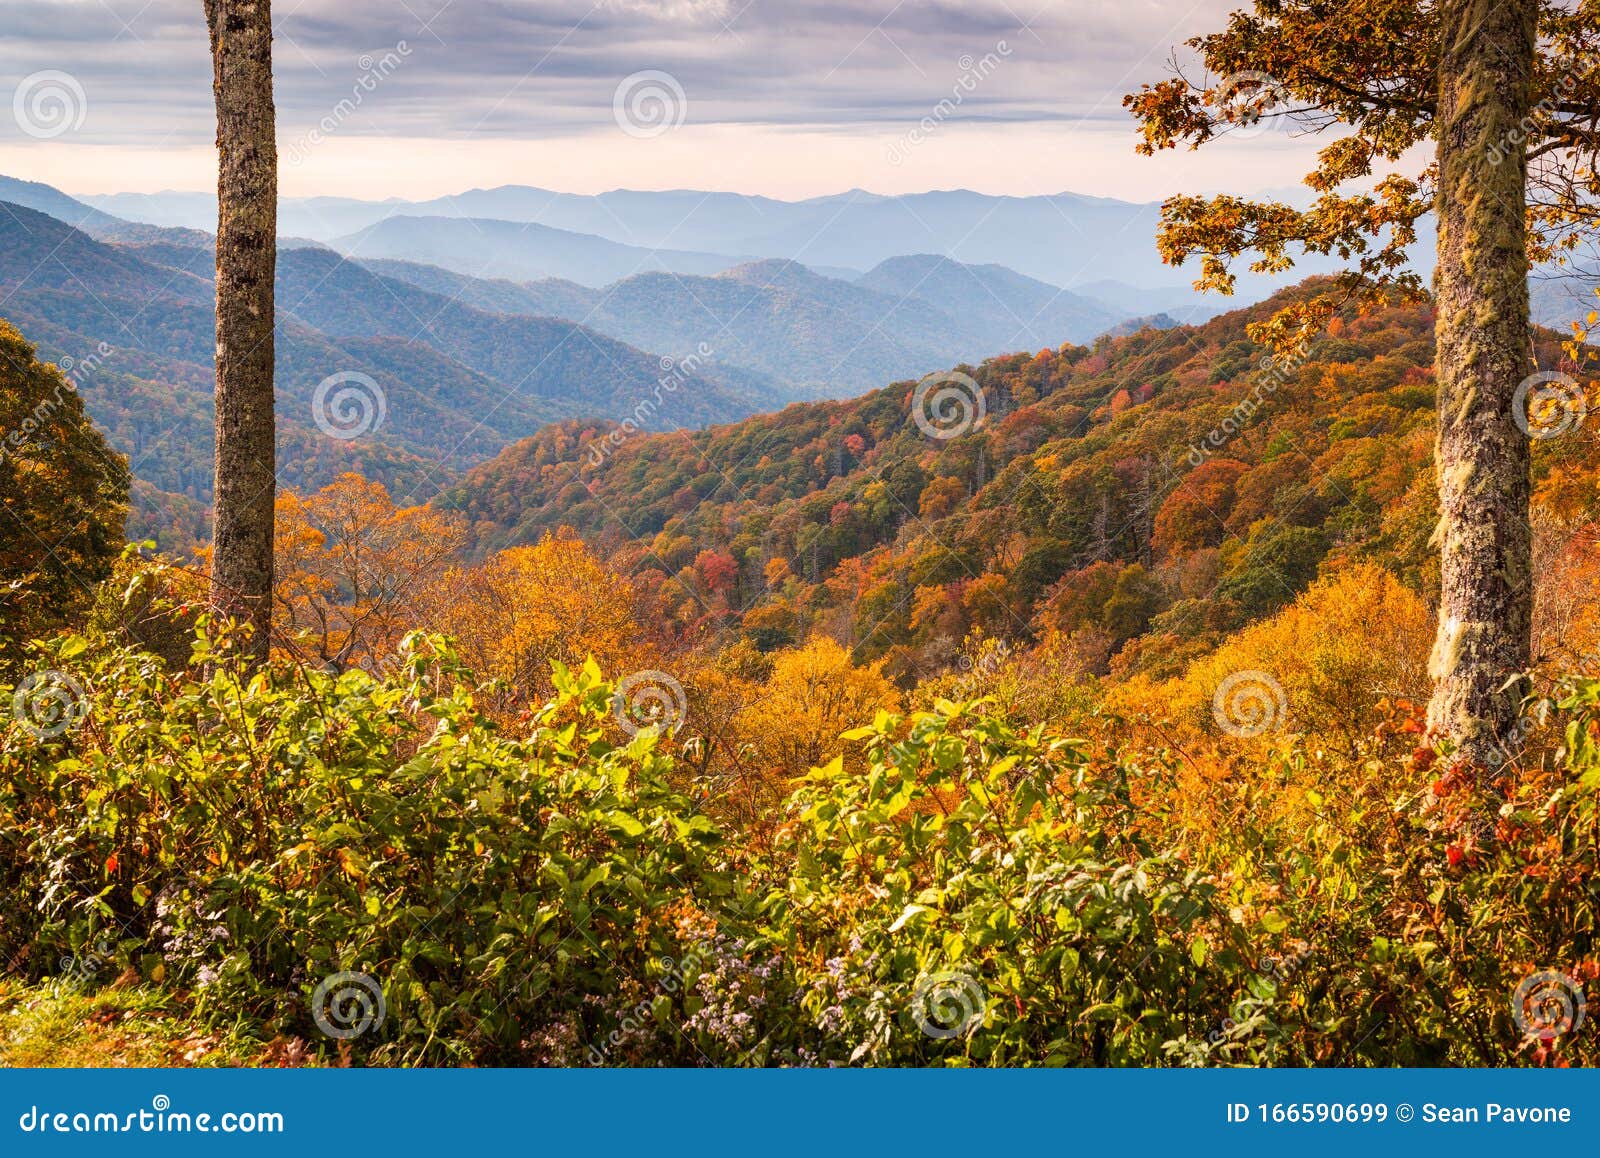 smoky mountains national park, tennessee autumn landscape at newfound gap